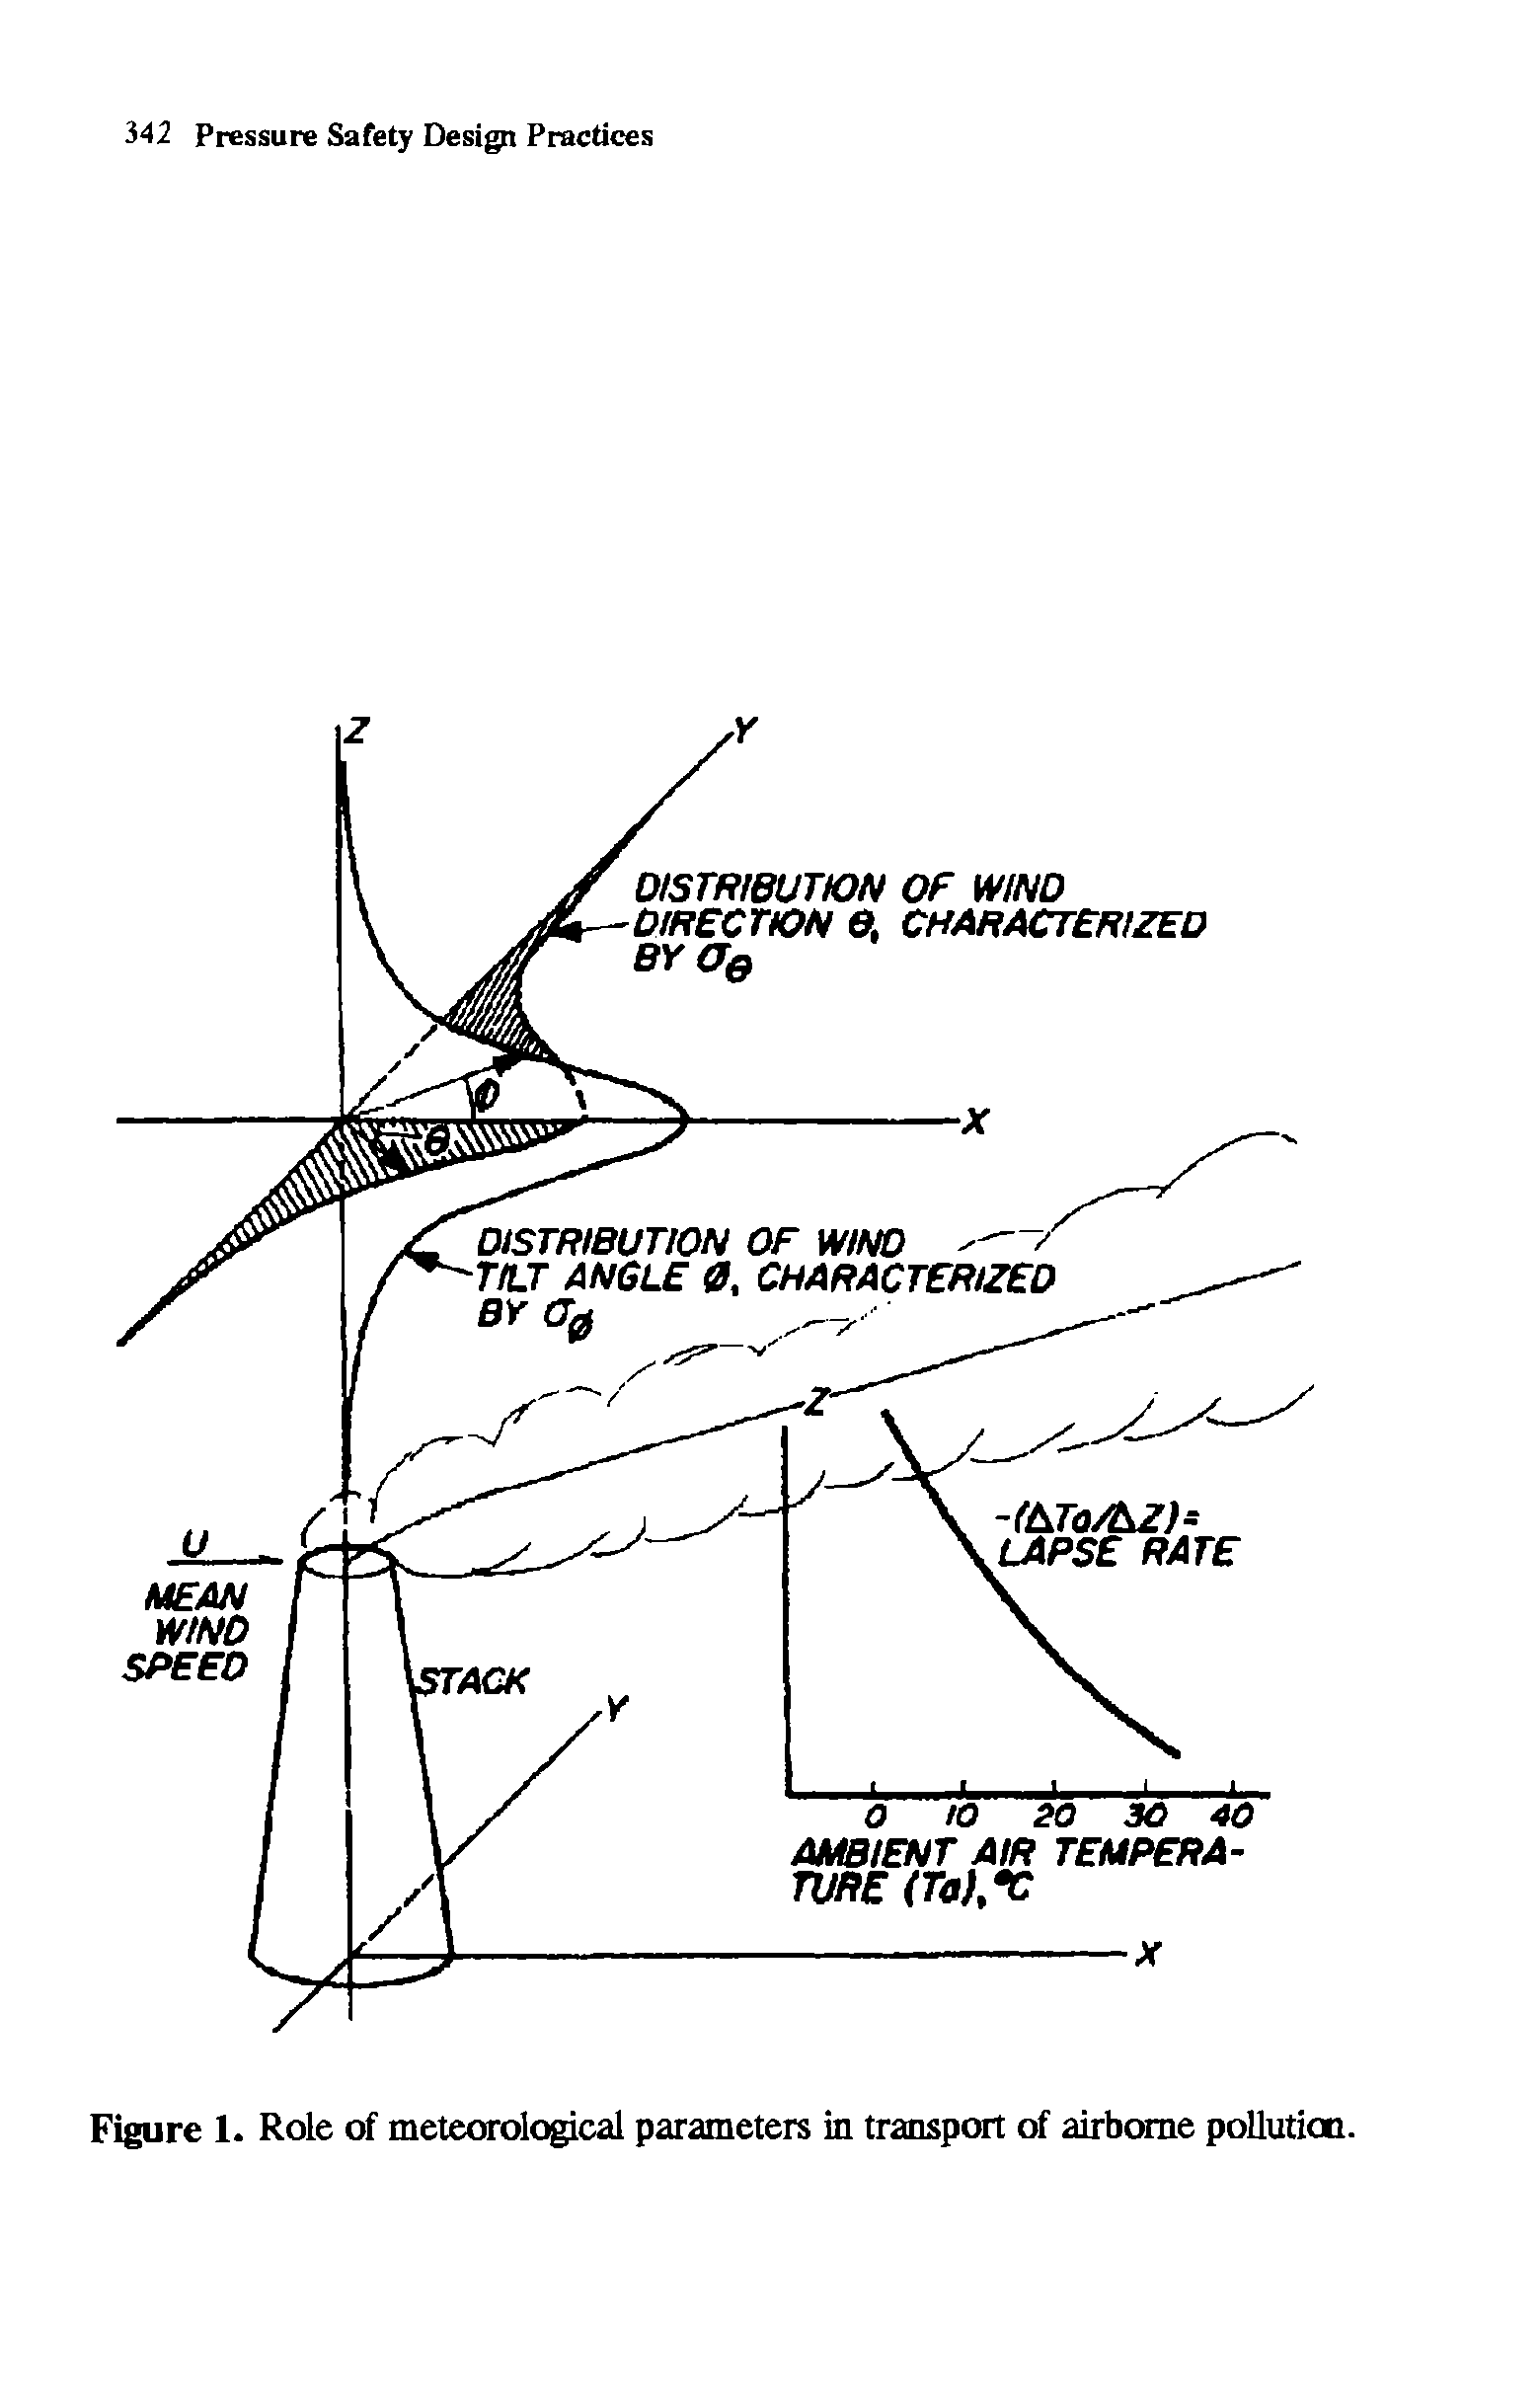 Figure 1. Role of meteorological parameters in transport of airborne pollution.